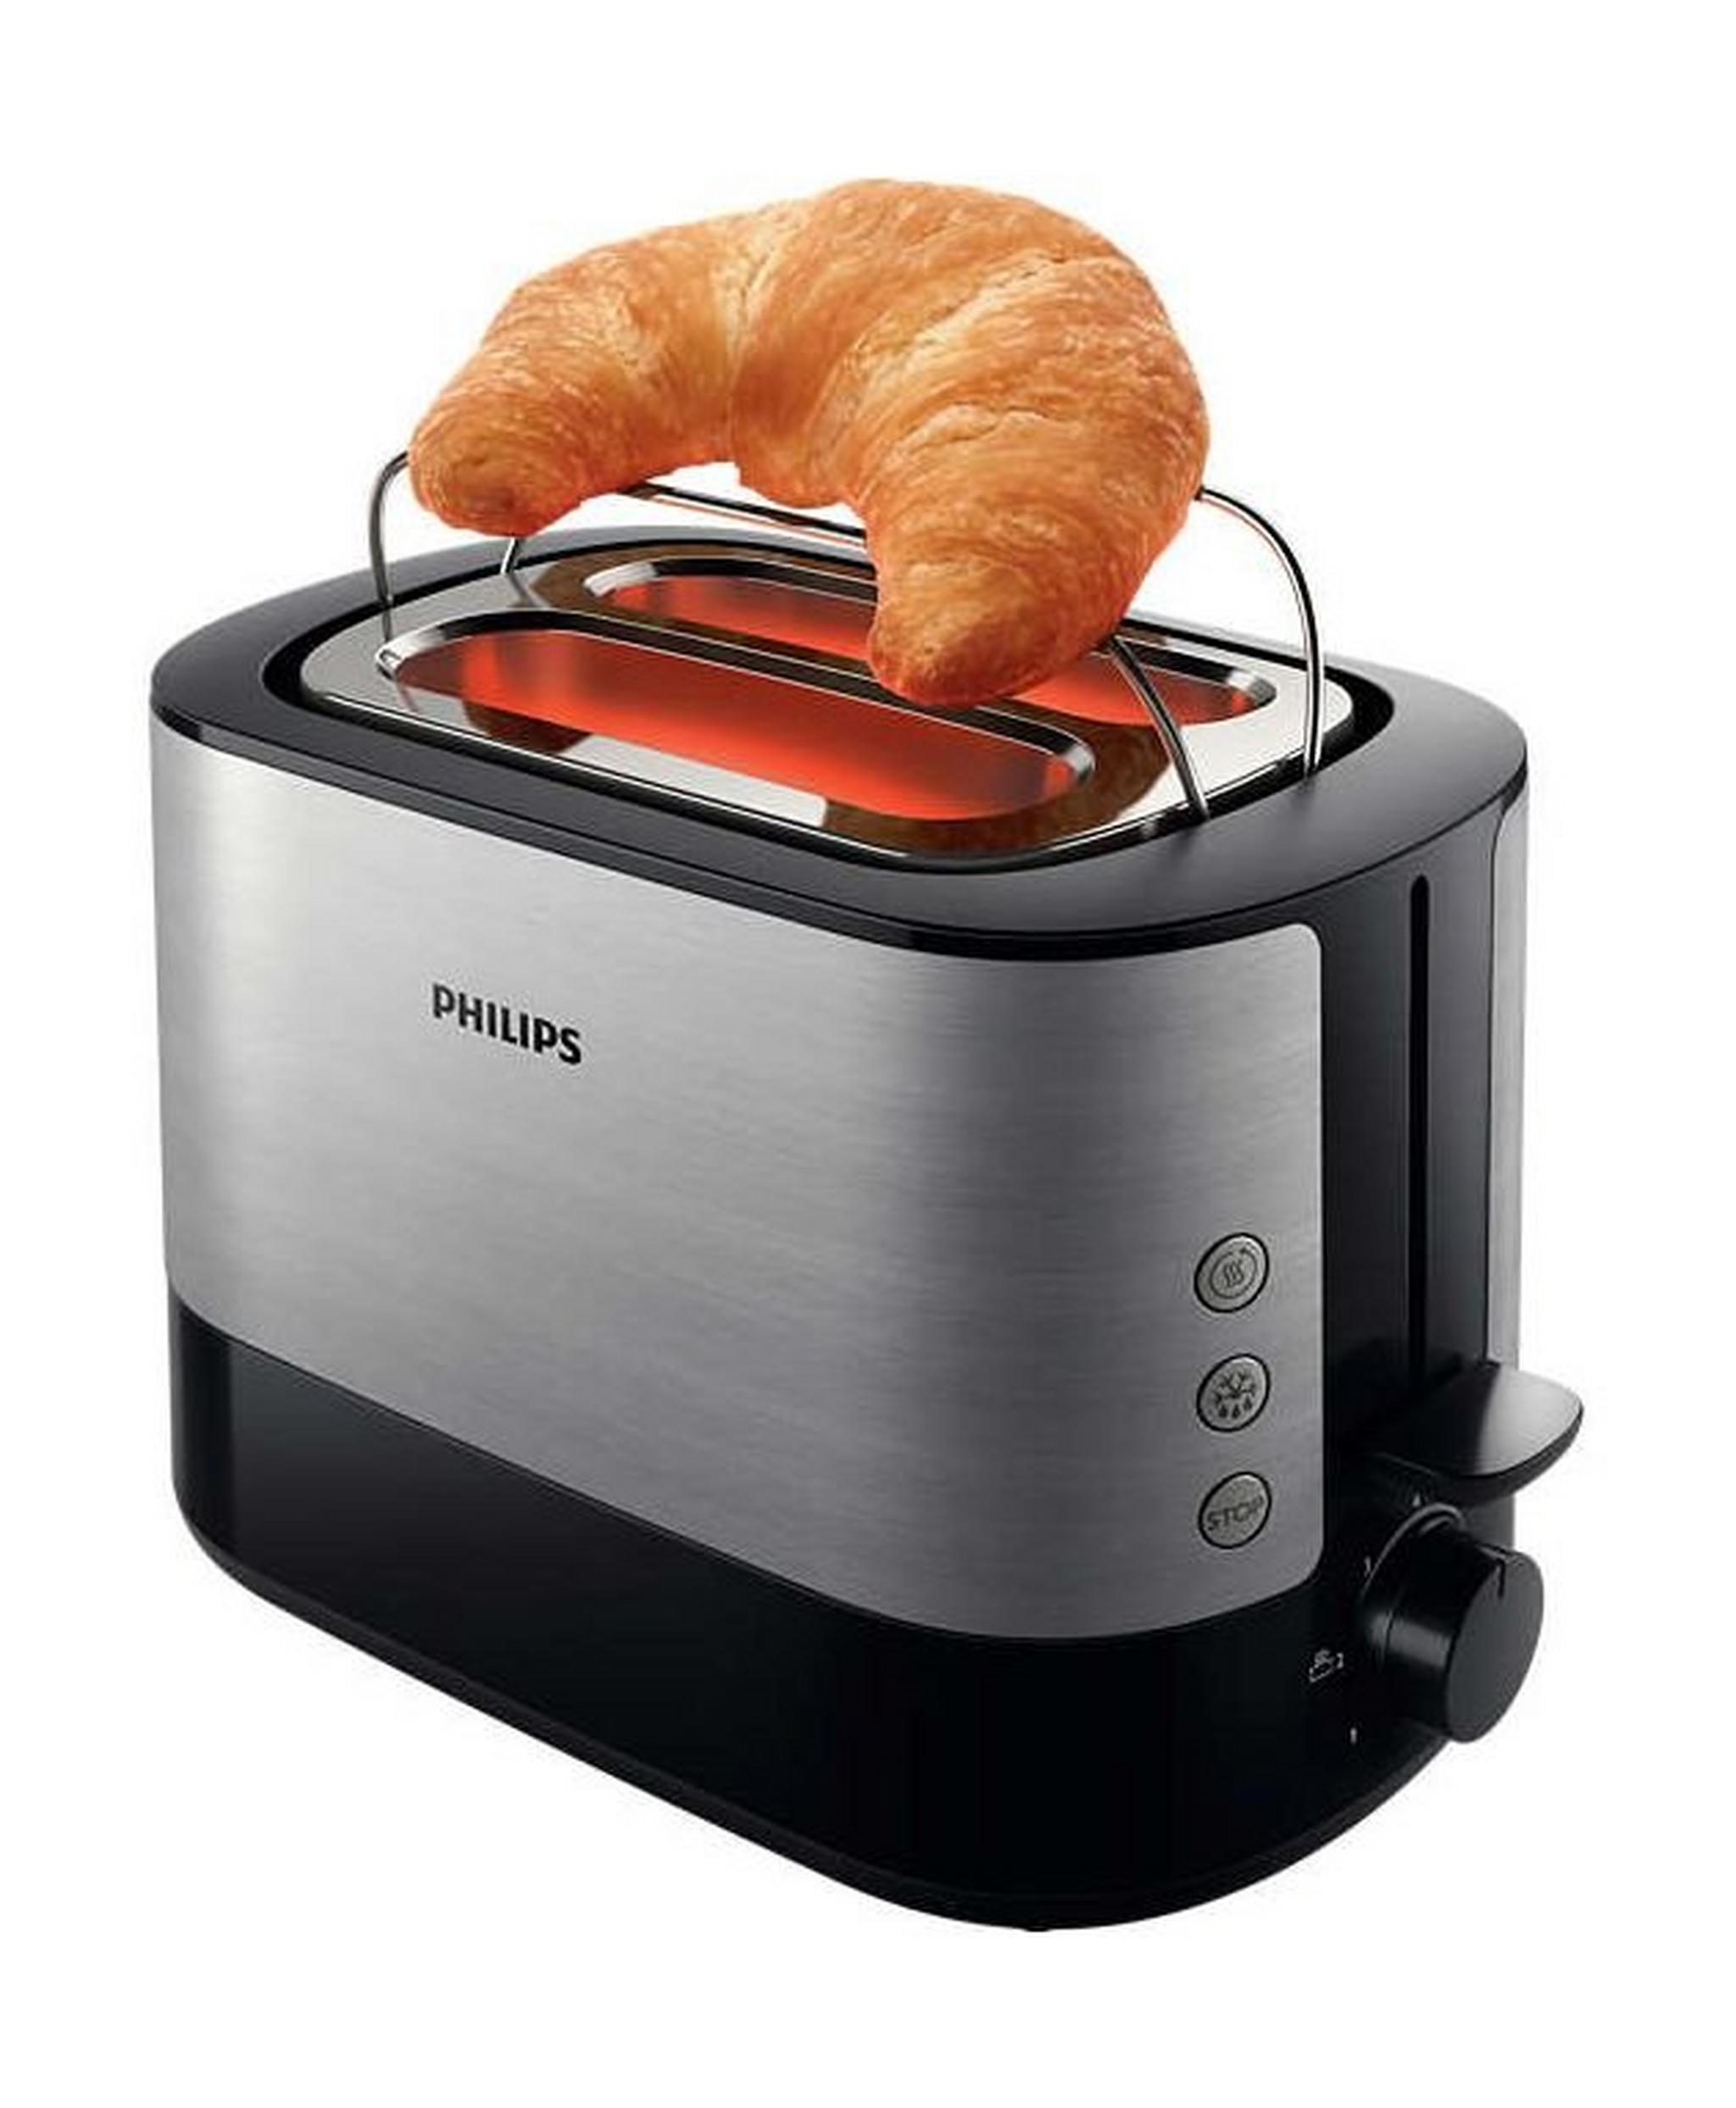 Philips Viva Collection 2 Slots Toaster (HD2637/91) - Black